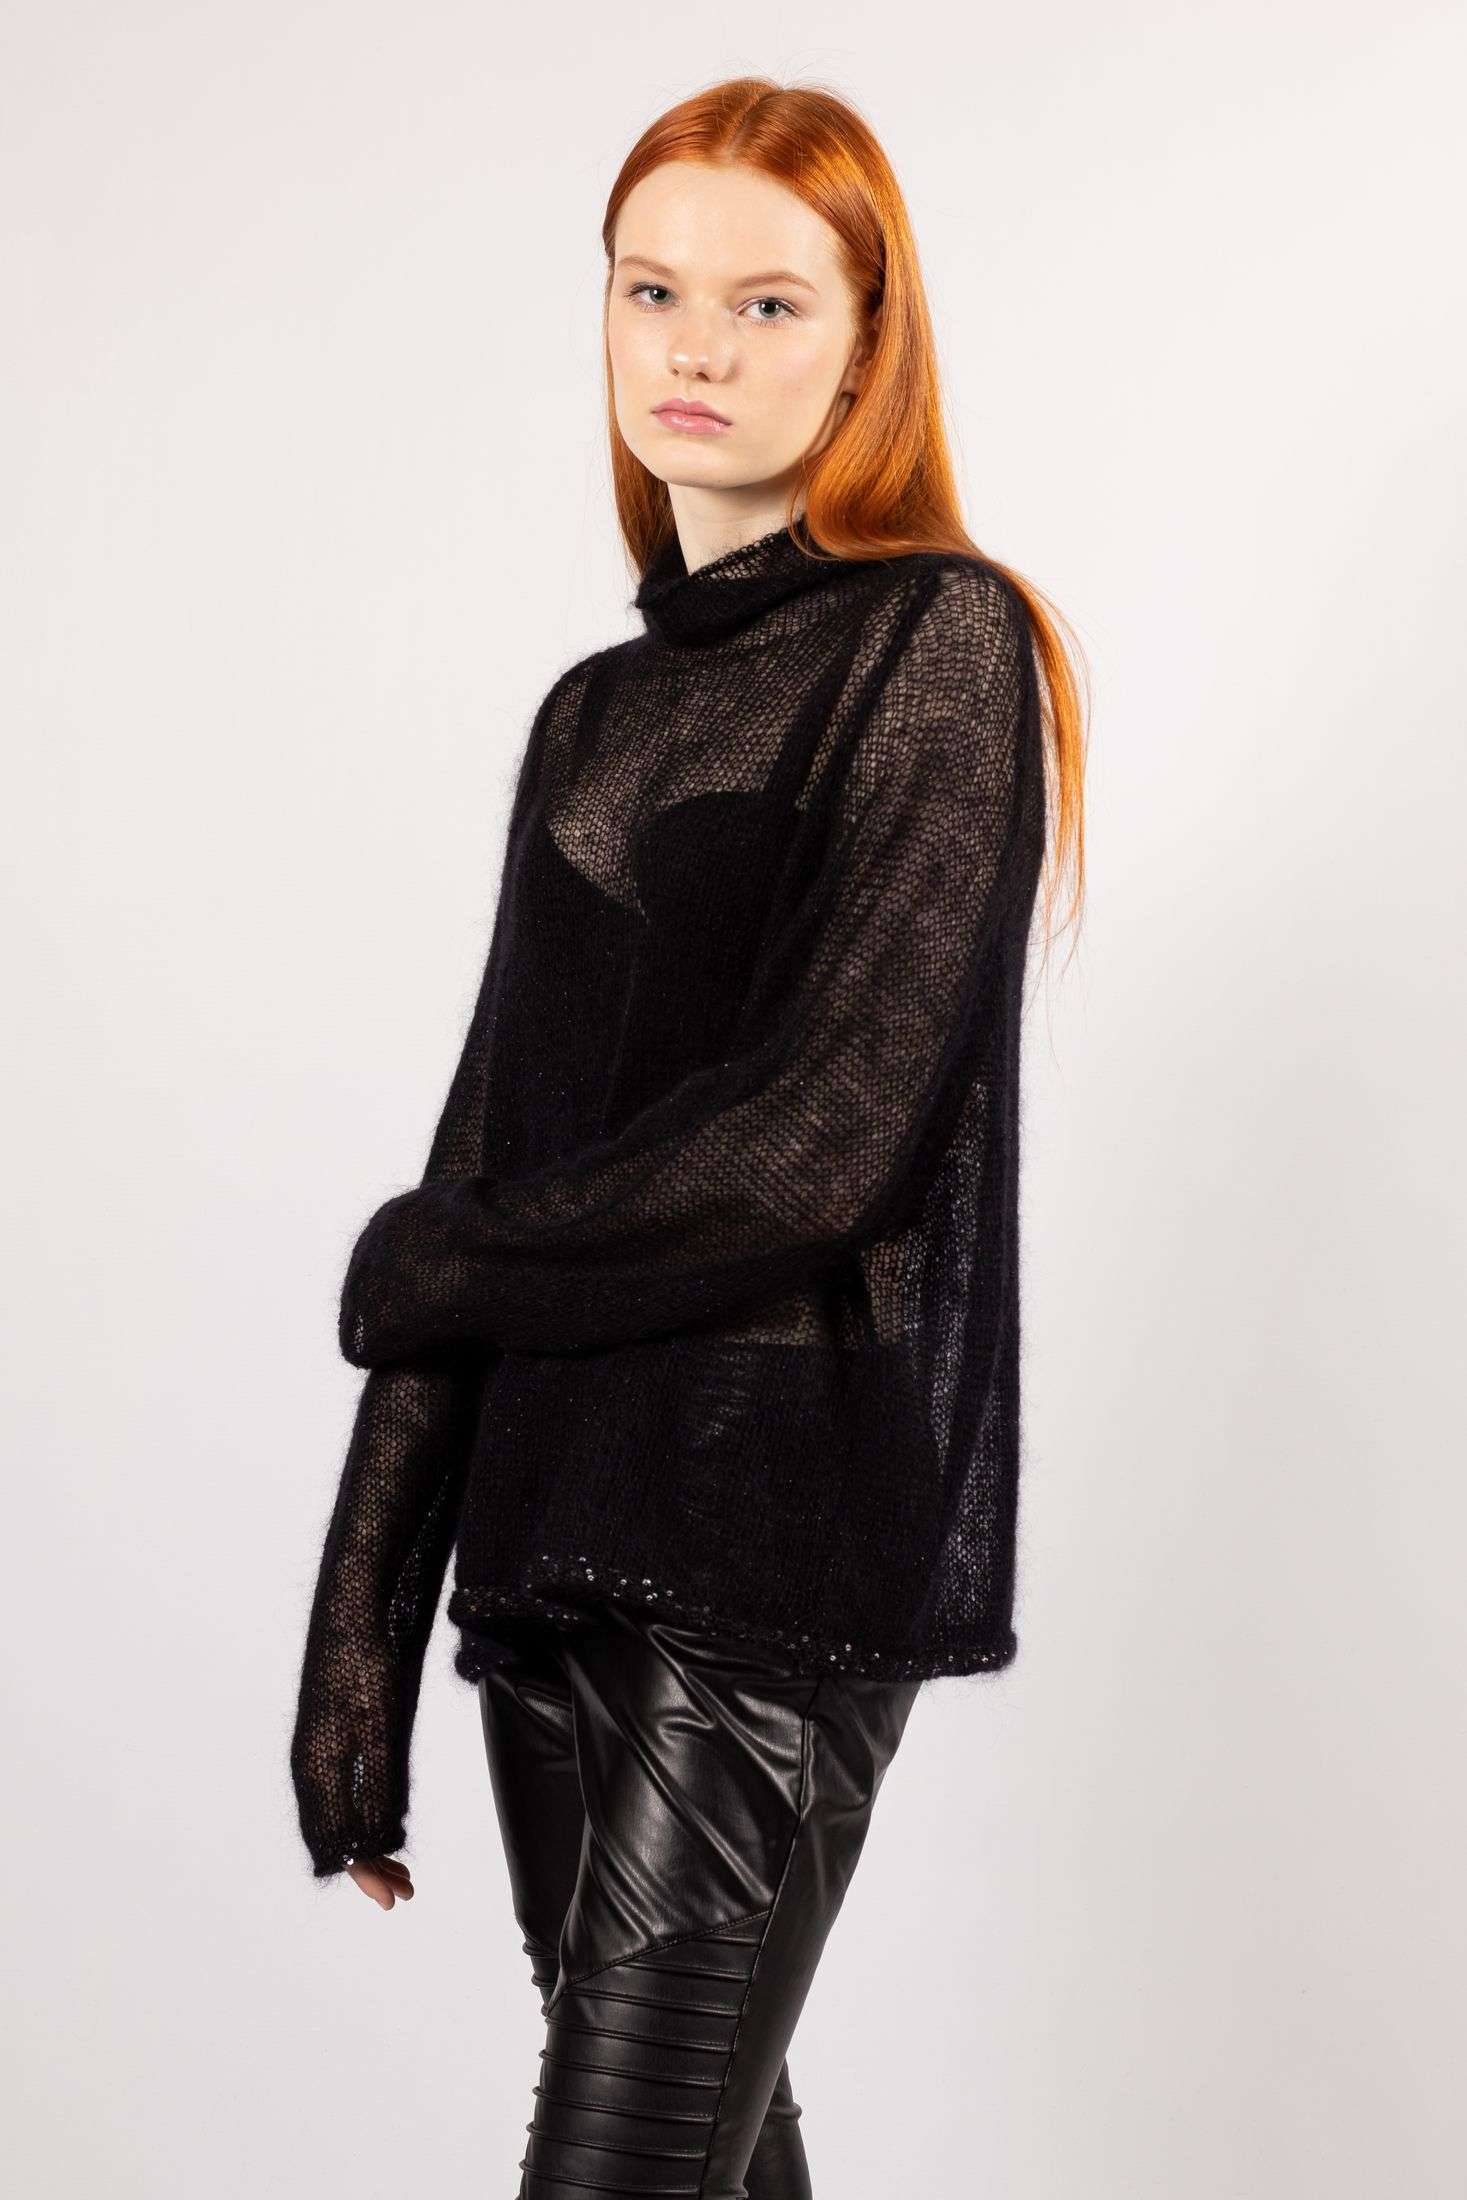 Embrace the allure of transparency with our women's black mohair sweater, a winter essential designed with long sleeves for both fashion and warmth.